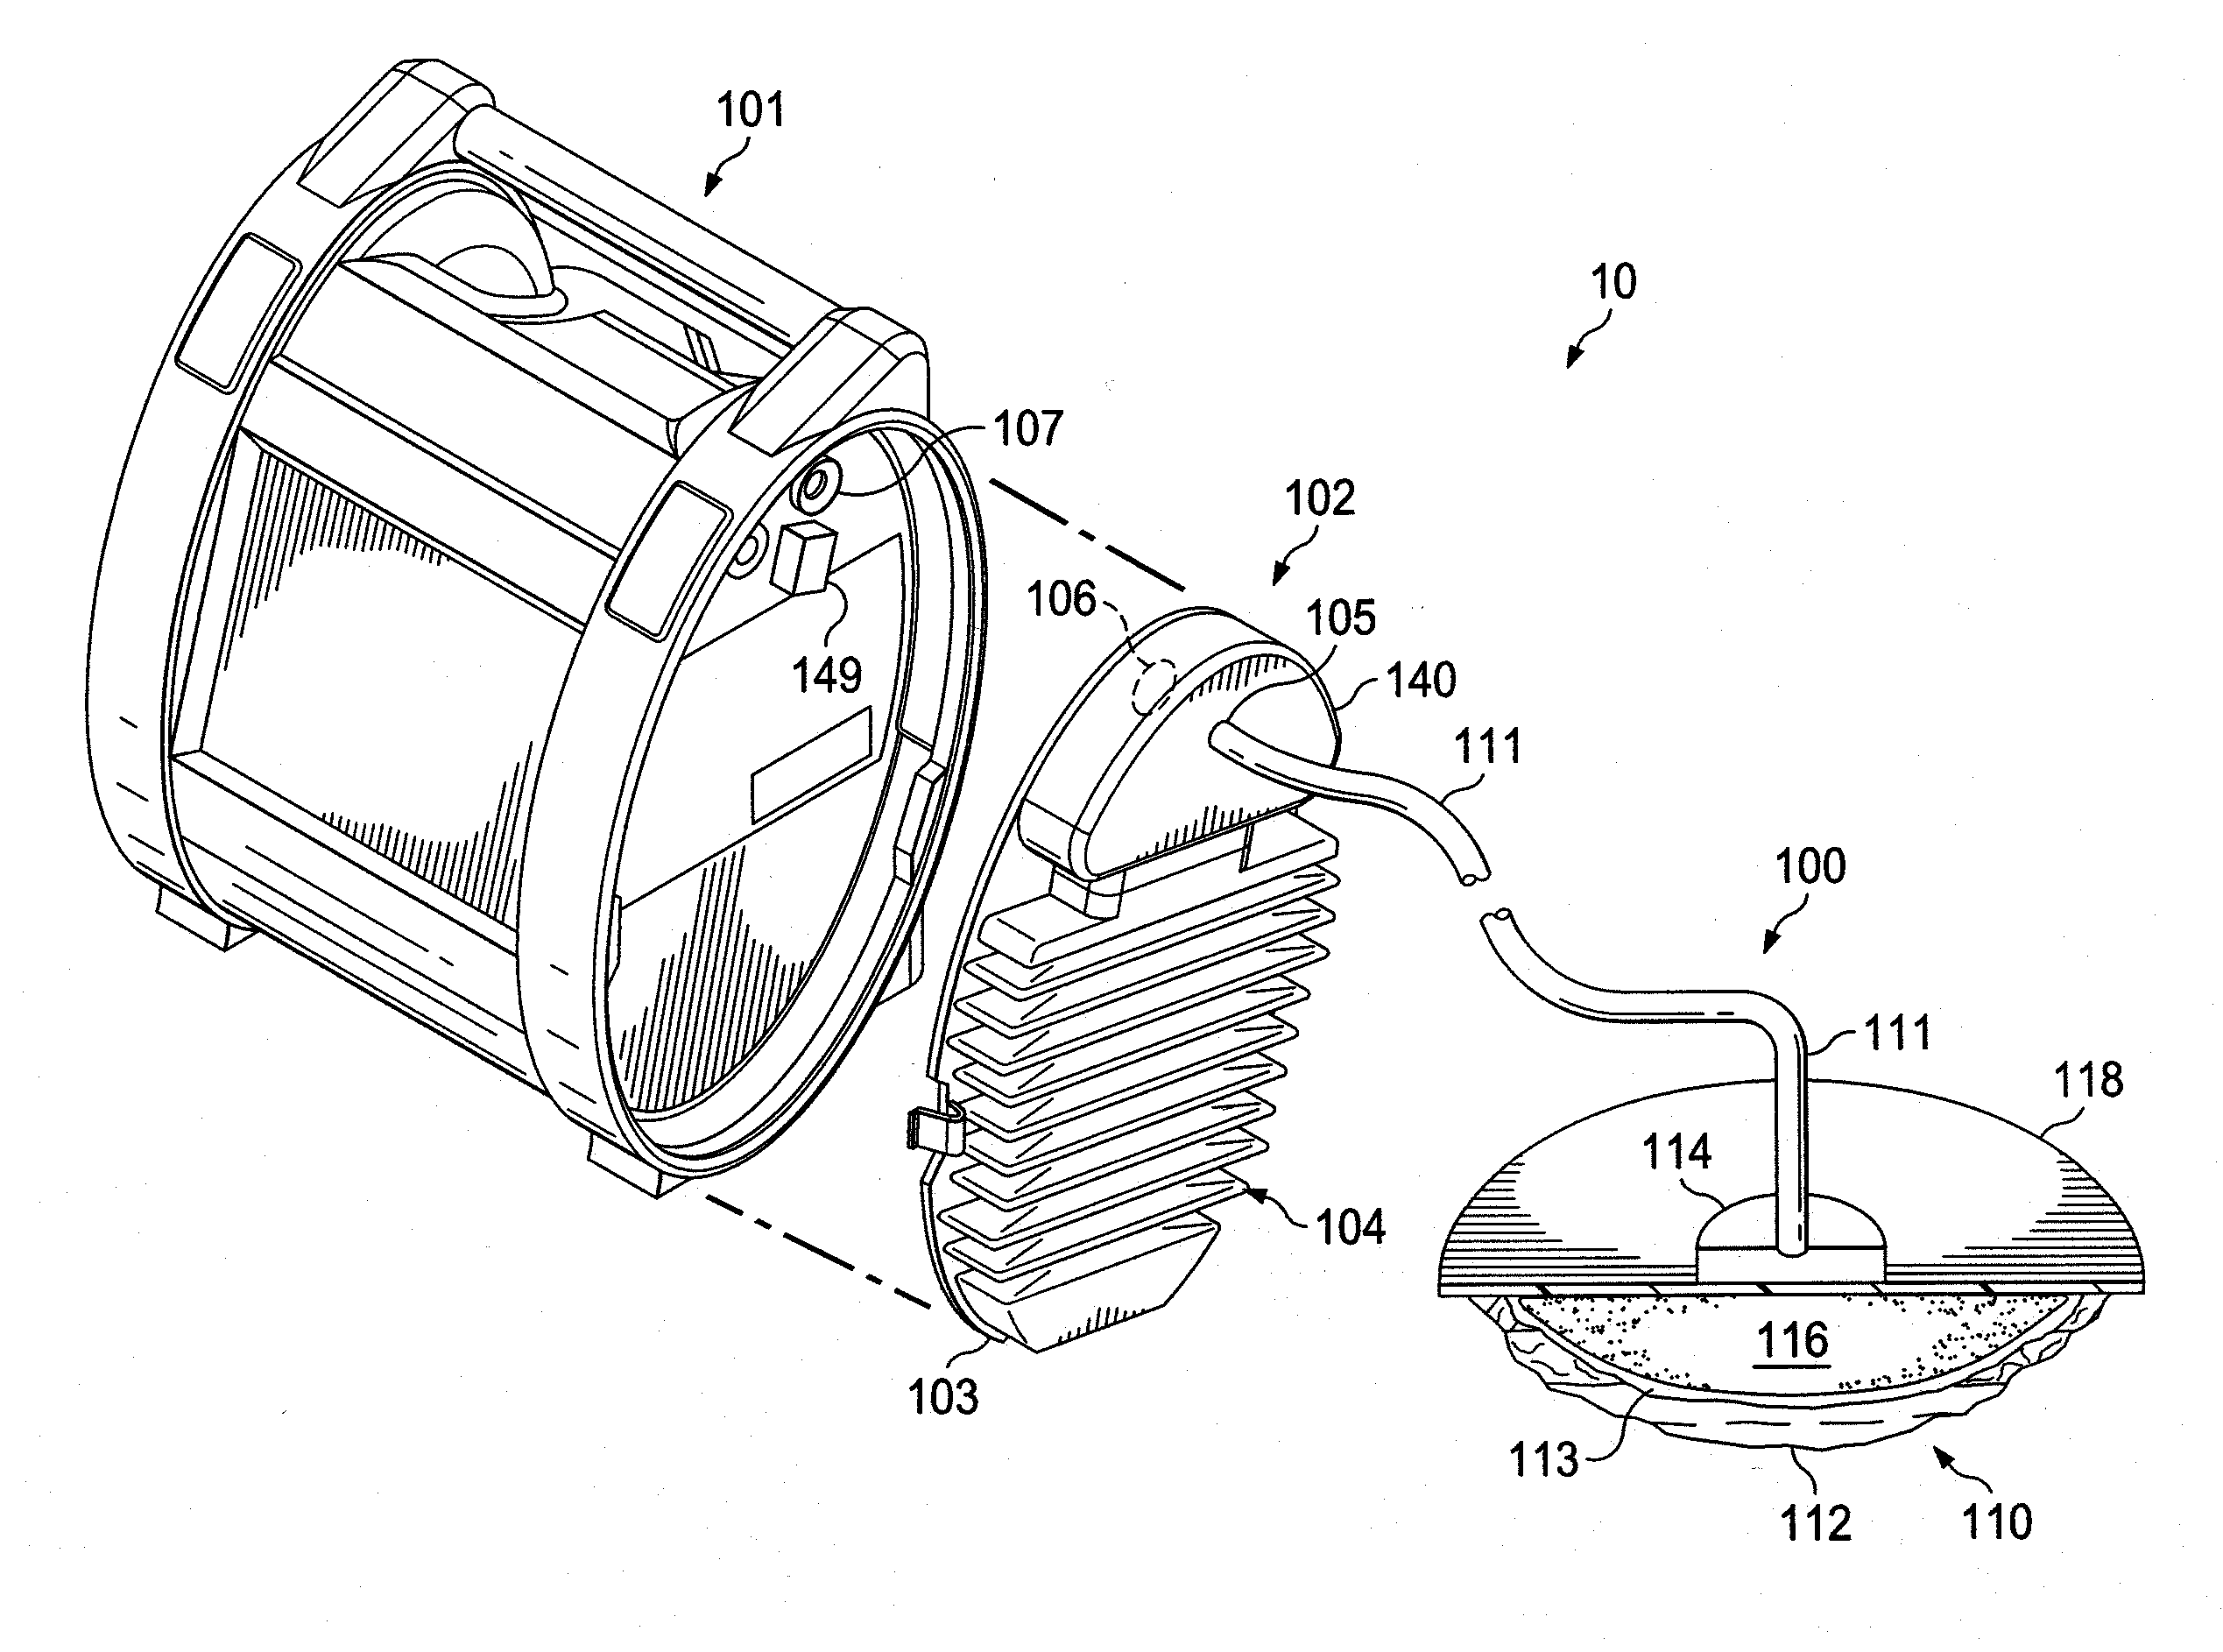 Collapsible canister for use with reduced pressure therapy device